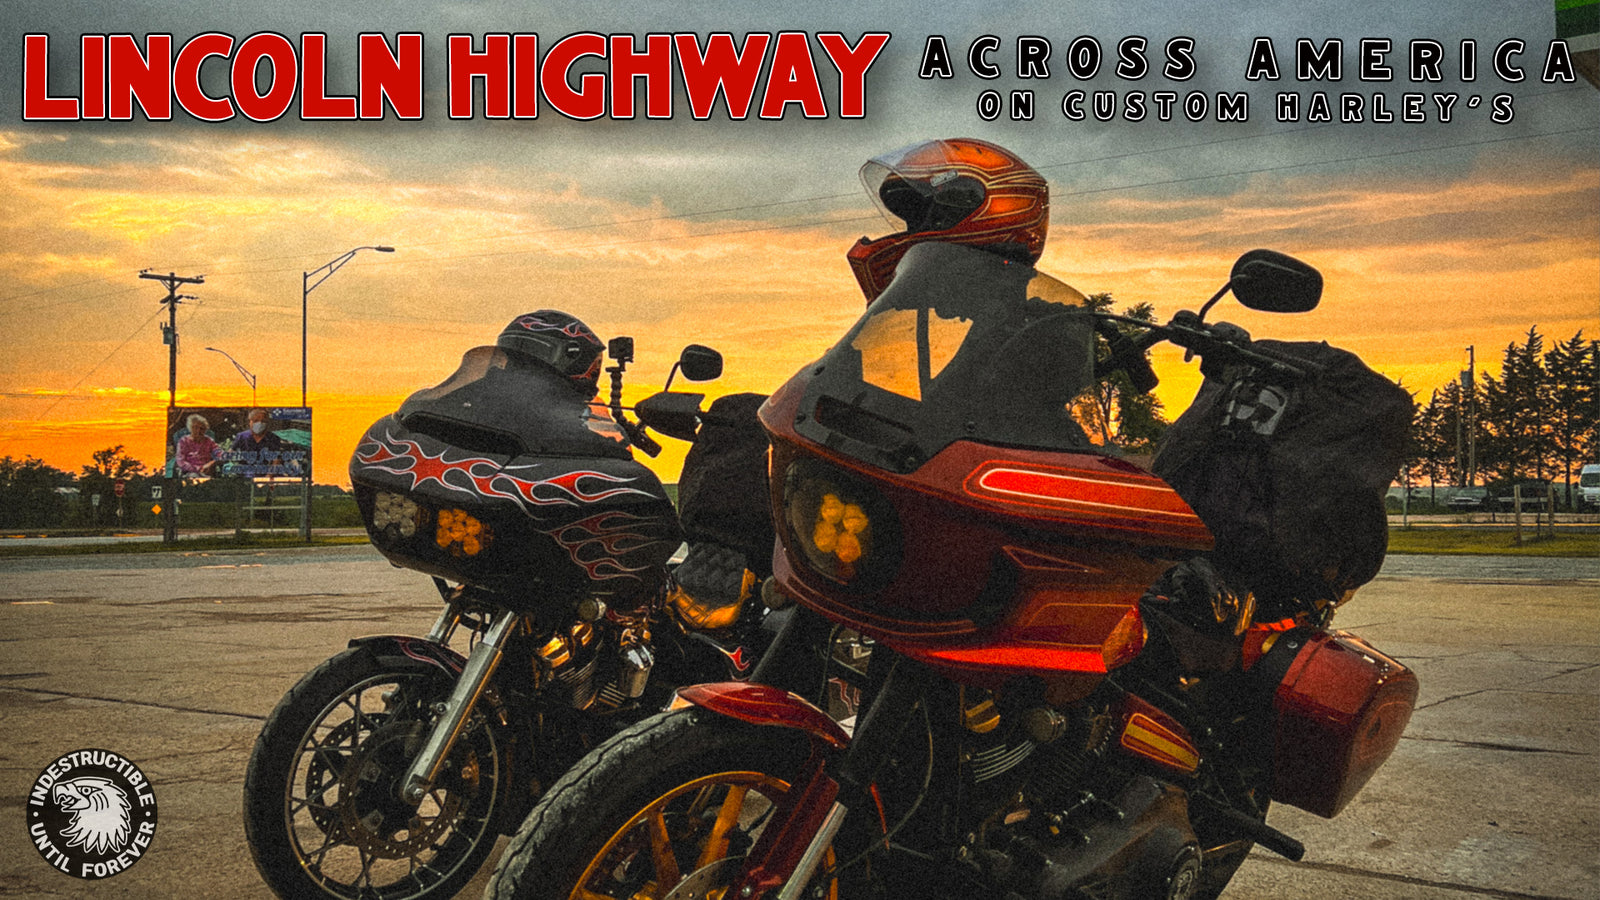 Middle of America On Custom Harley Davidson's | LINCOLN HIGHWAY